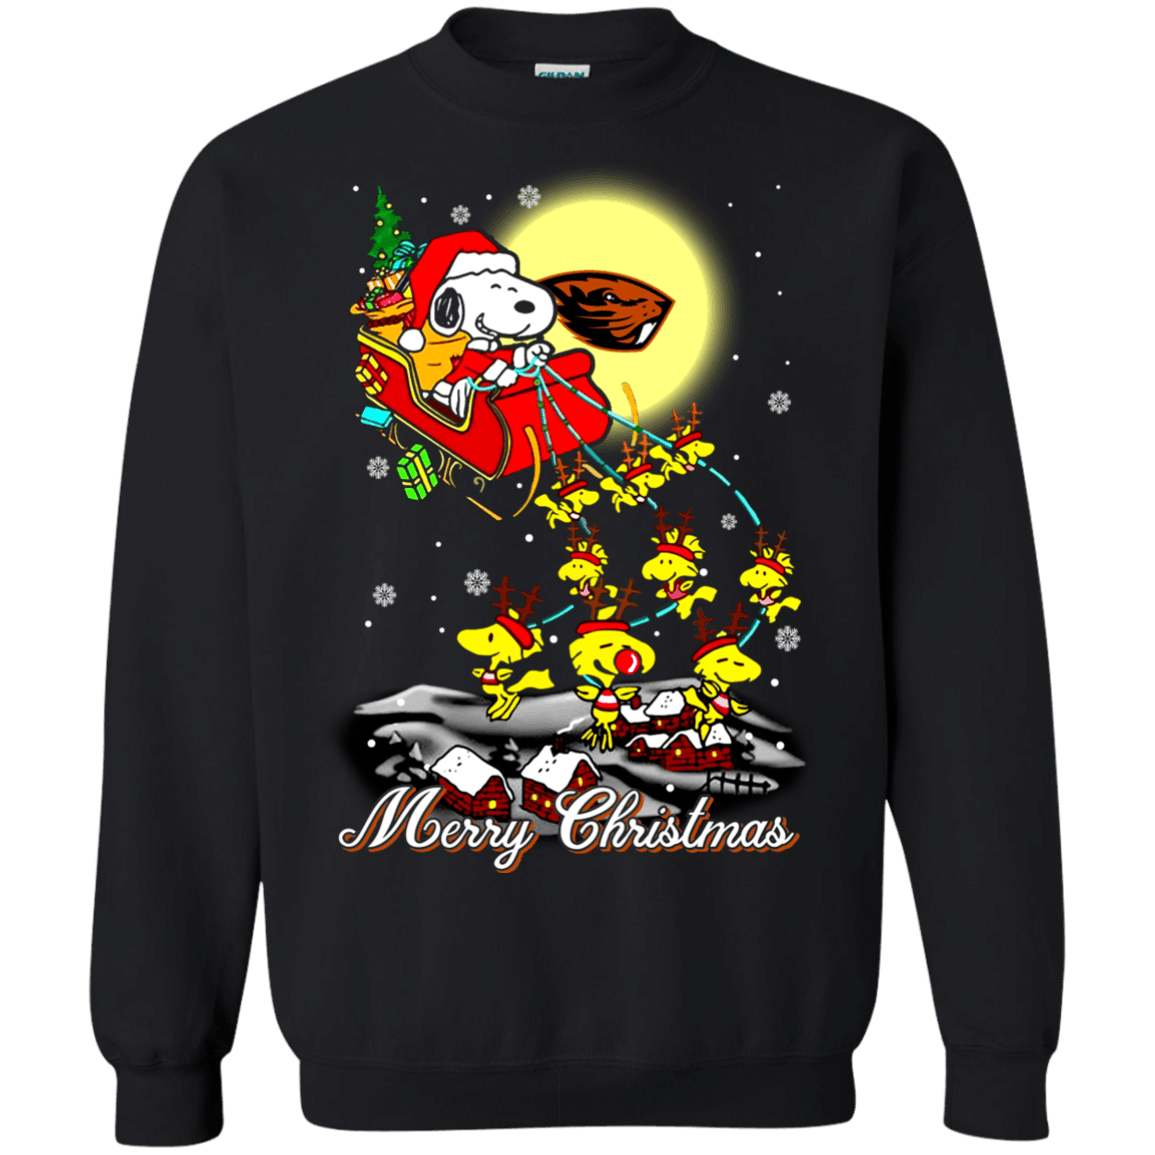 Amazing Oregon State Beavers Ugly Christmas Sweaters Santa Claus With Sleigh And Snoopy Sweatshirts